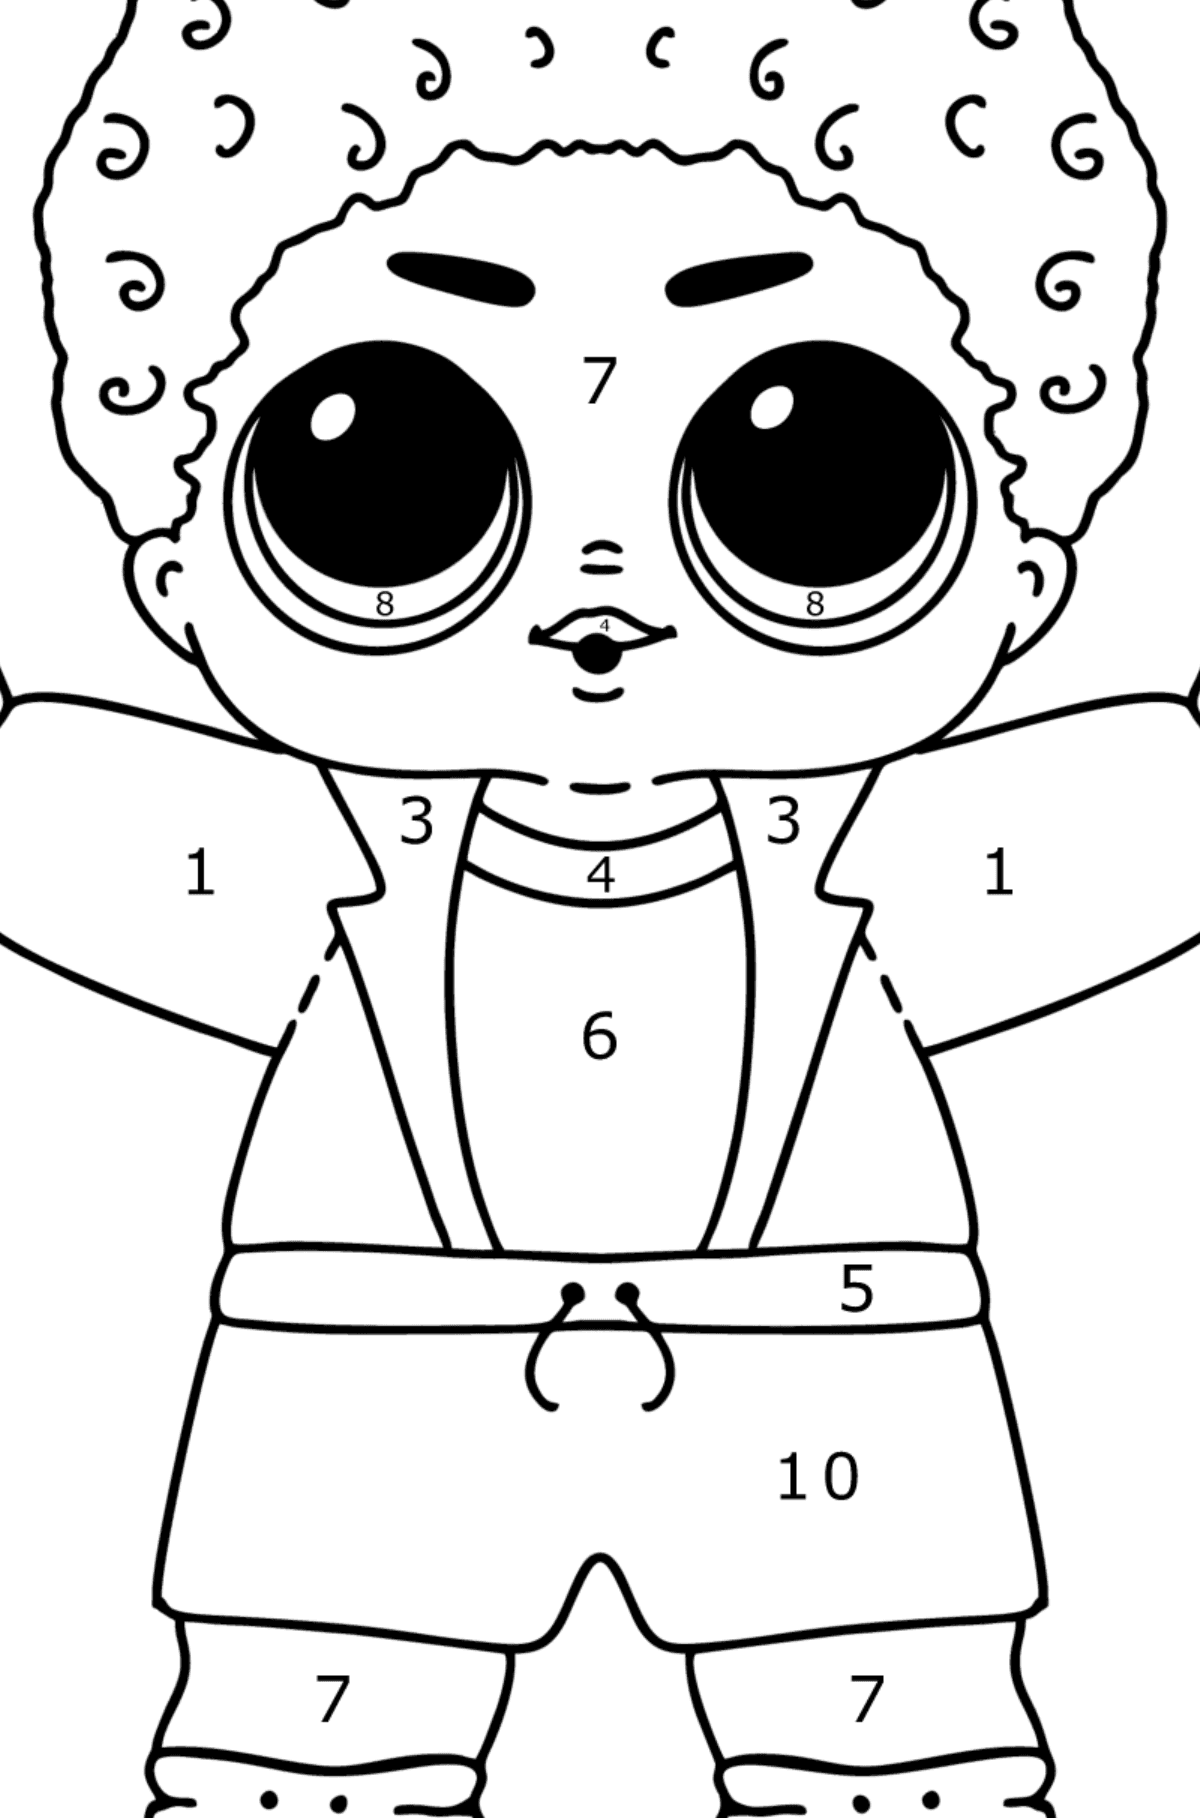 Coloring page LOL boy King - Coloring by Numbers for Kids